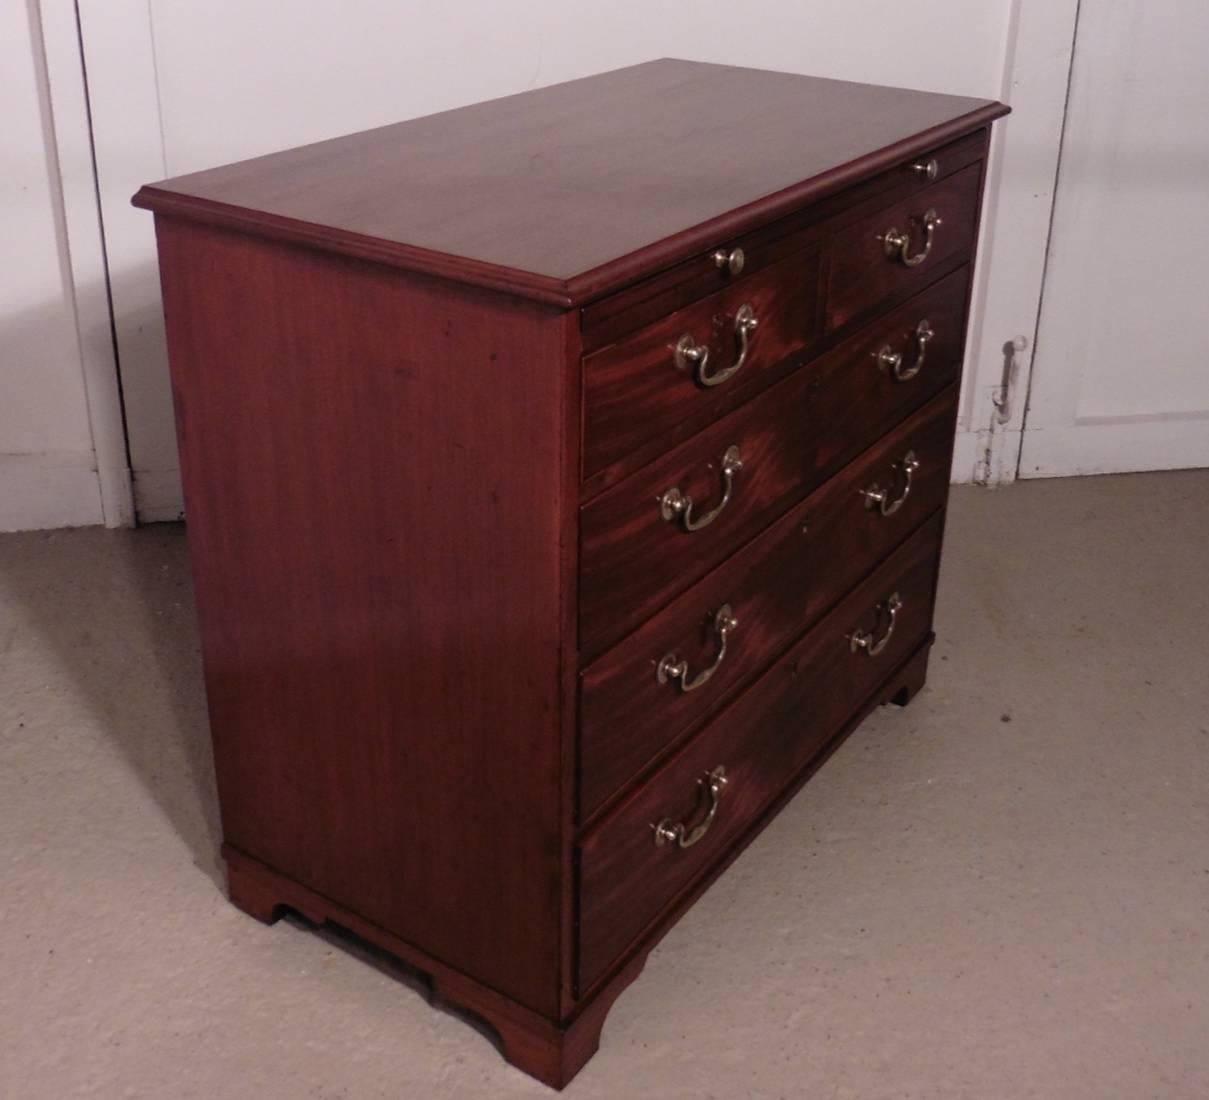 Small Georgian mahogany chest of drawers, Batchelor’s chest with brushing slide

The chest has two short drawers at the top and three graduated long drawers beneath 
The drawers run very smoothly they have brass swan neck handles, above the